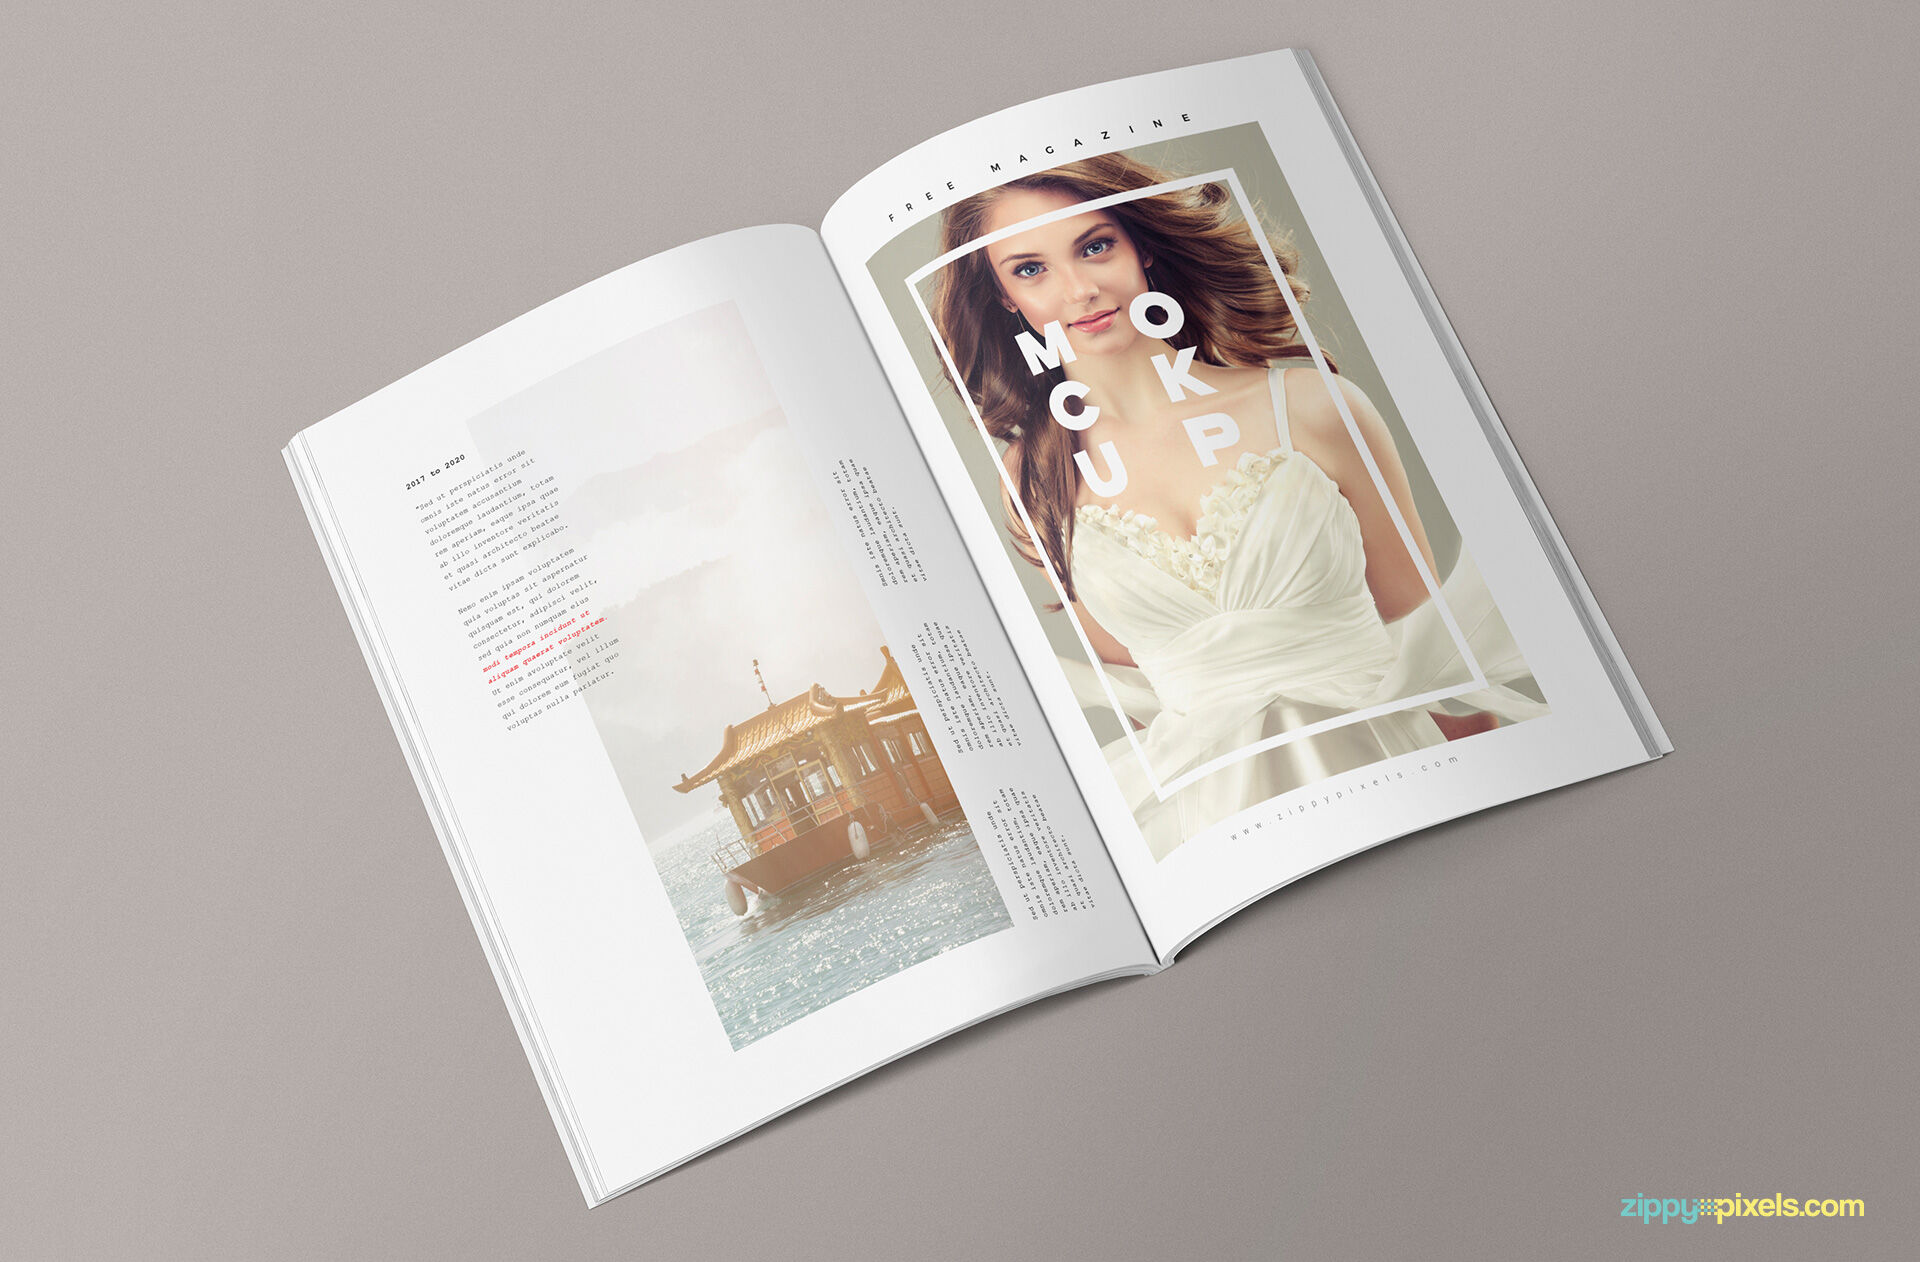 Three Mockups Showing US Letter Size Magazines' Inner Pages and Covers FREE PSD